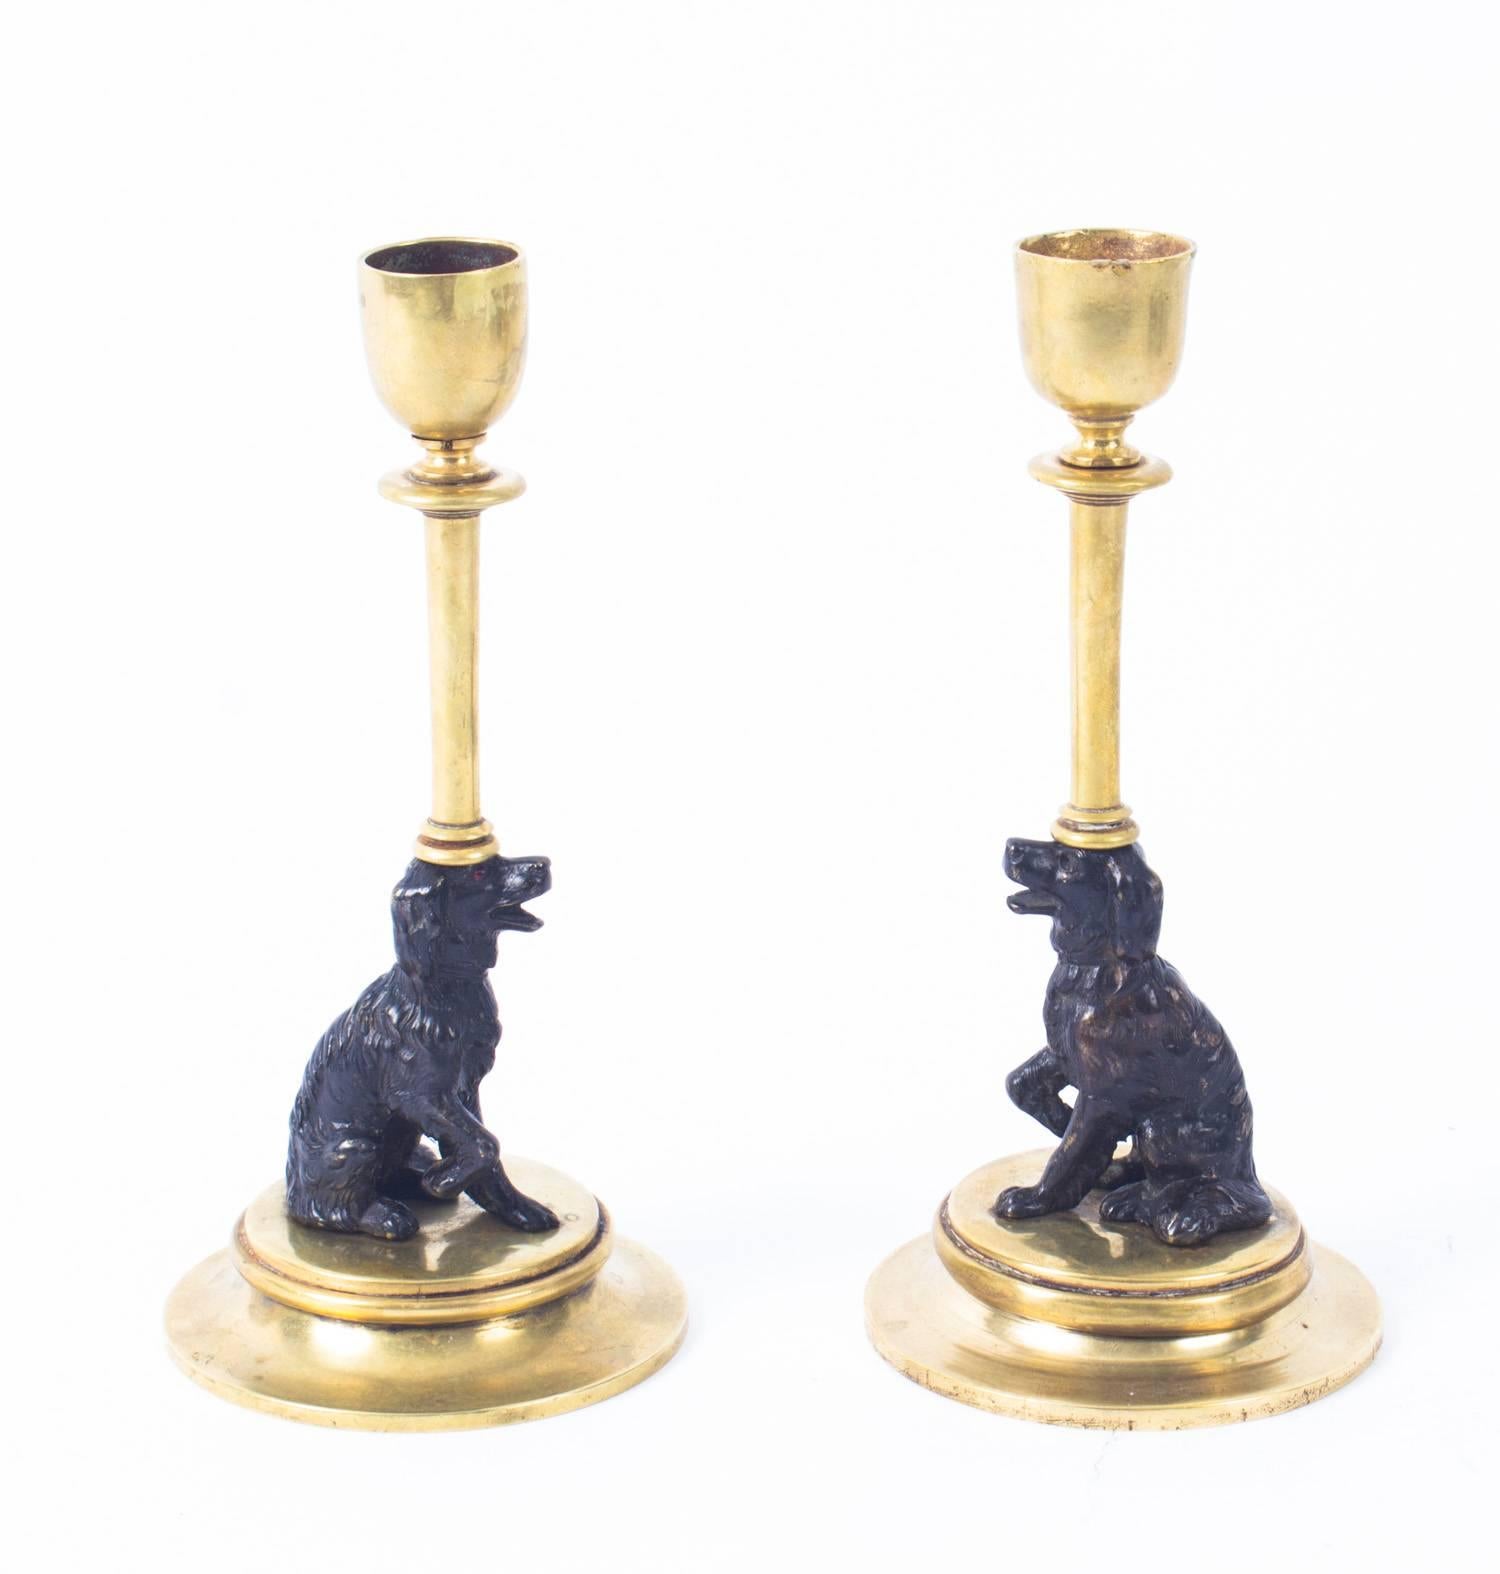 Antique Pair of French Novelty Bronze Spaniel Candlesticks, 19th Century 5